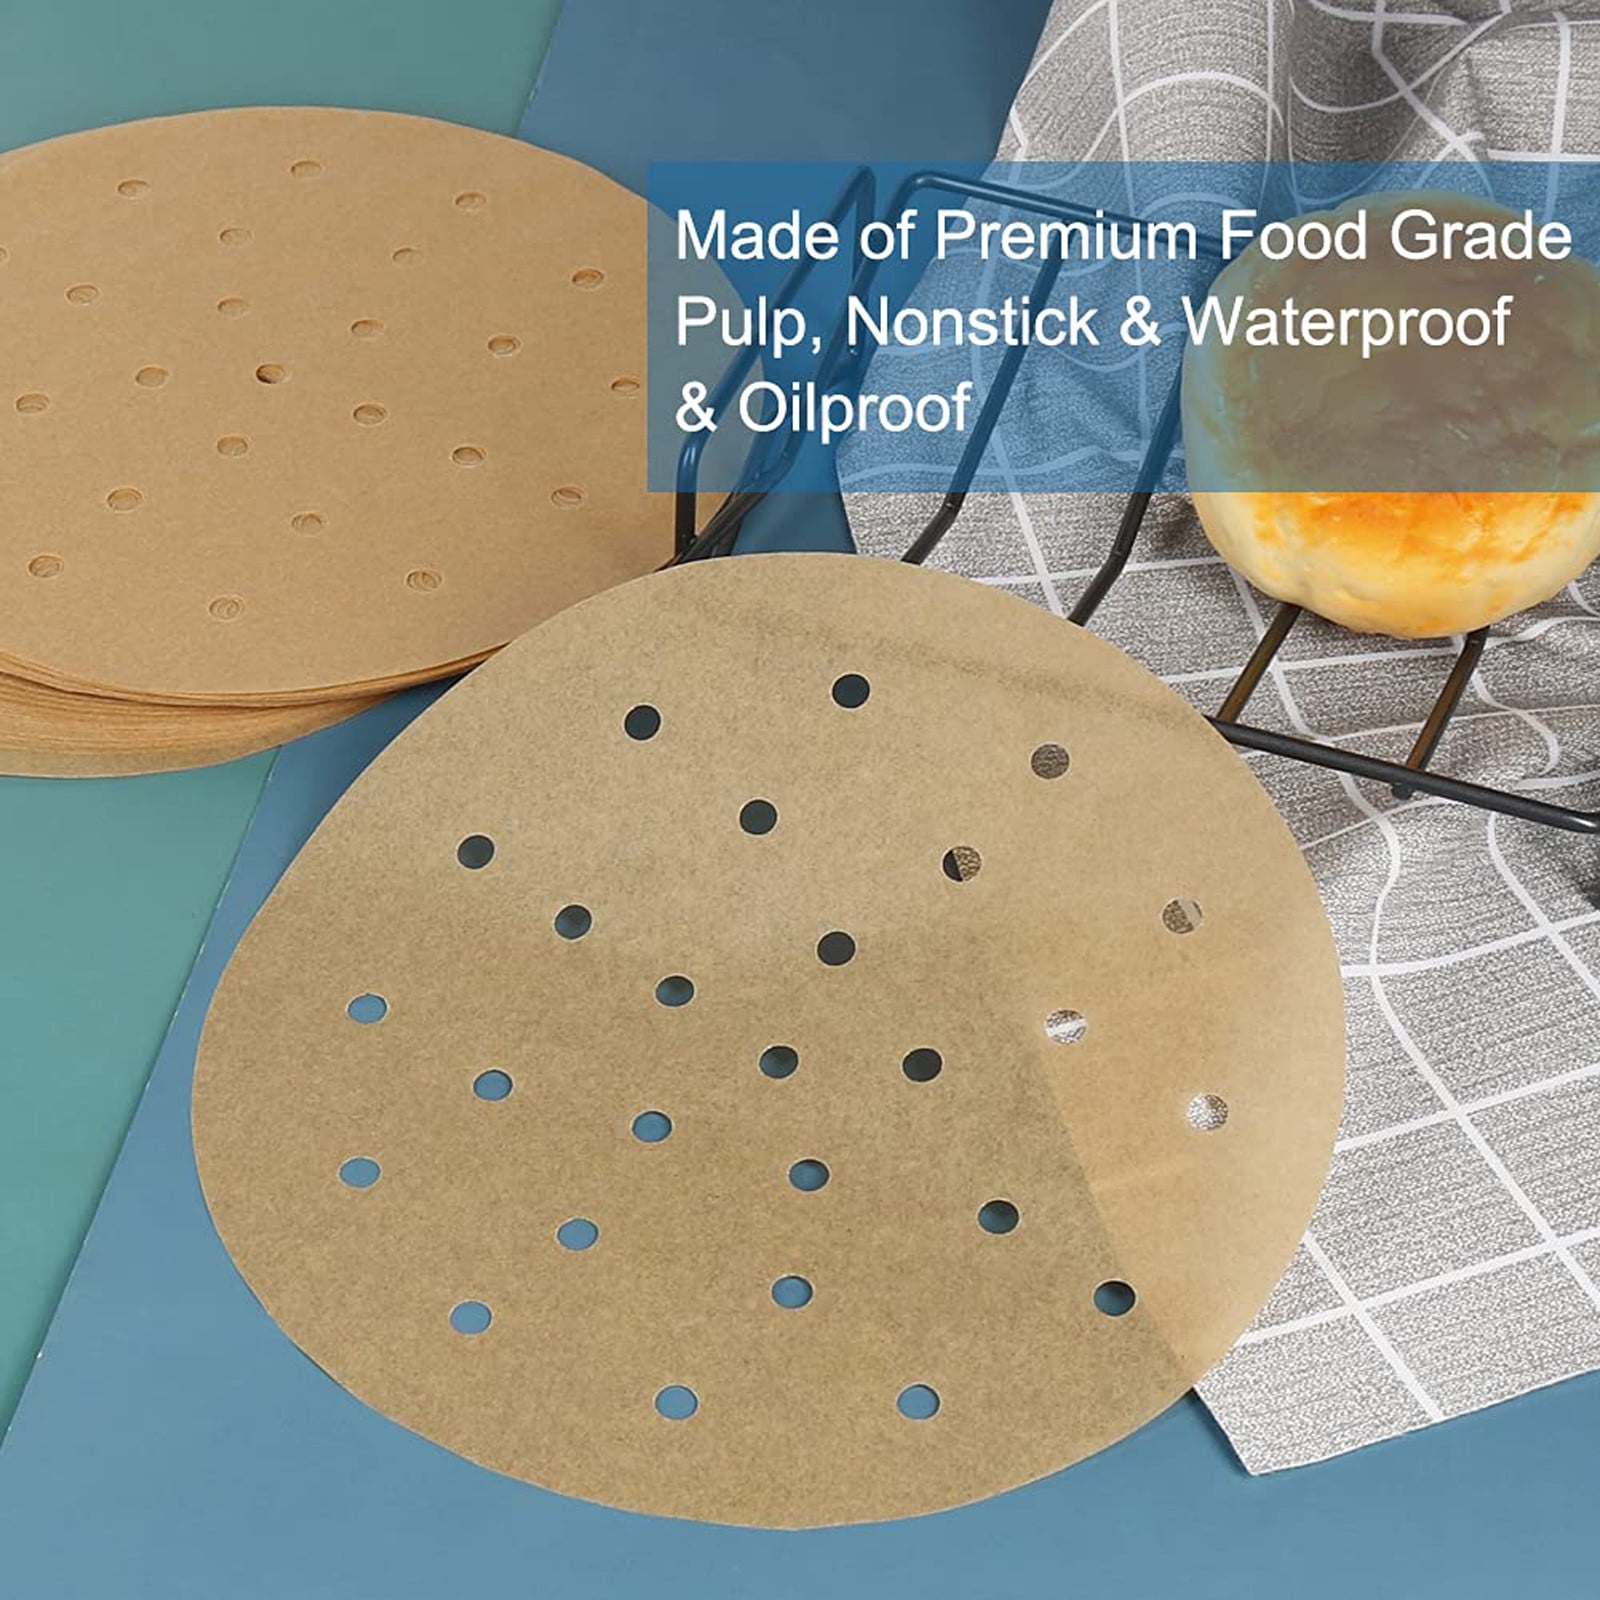 TKing Fashion Air Fryer Pad Paper Food Baking Paper High Temperature  Resistant Fryer - Brown 